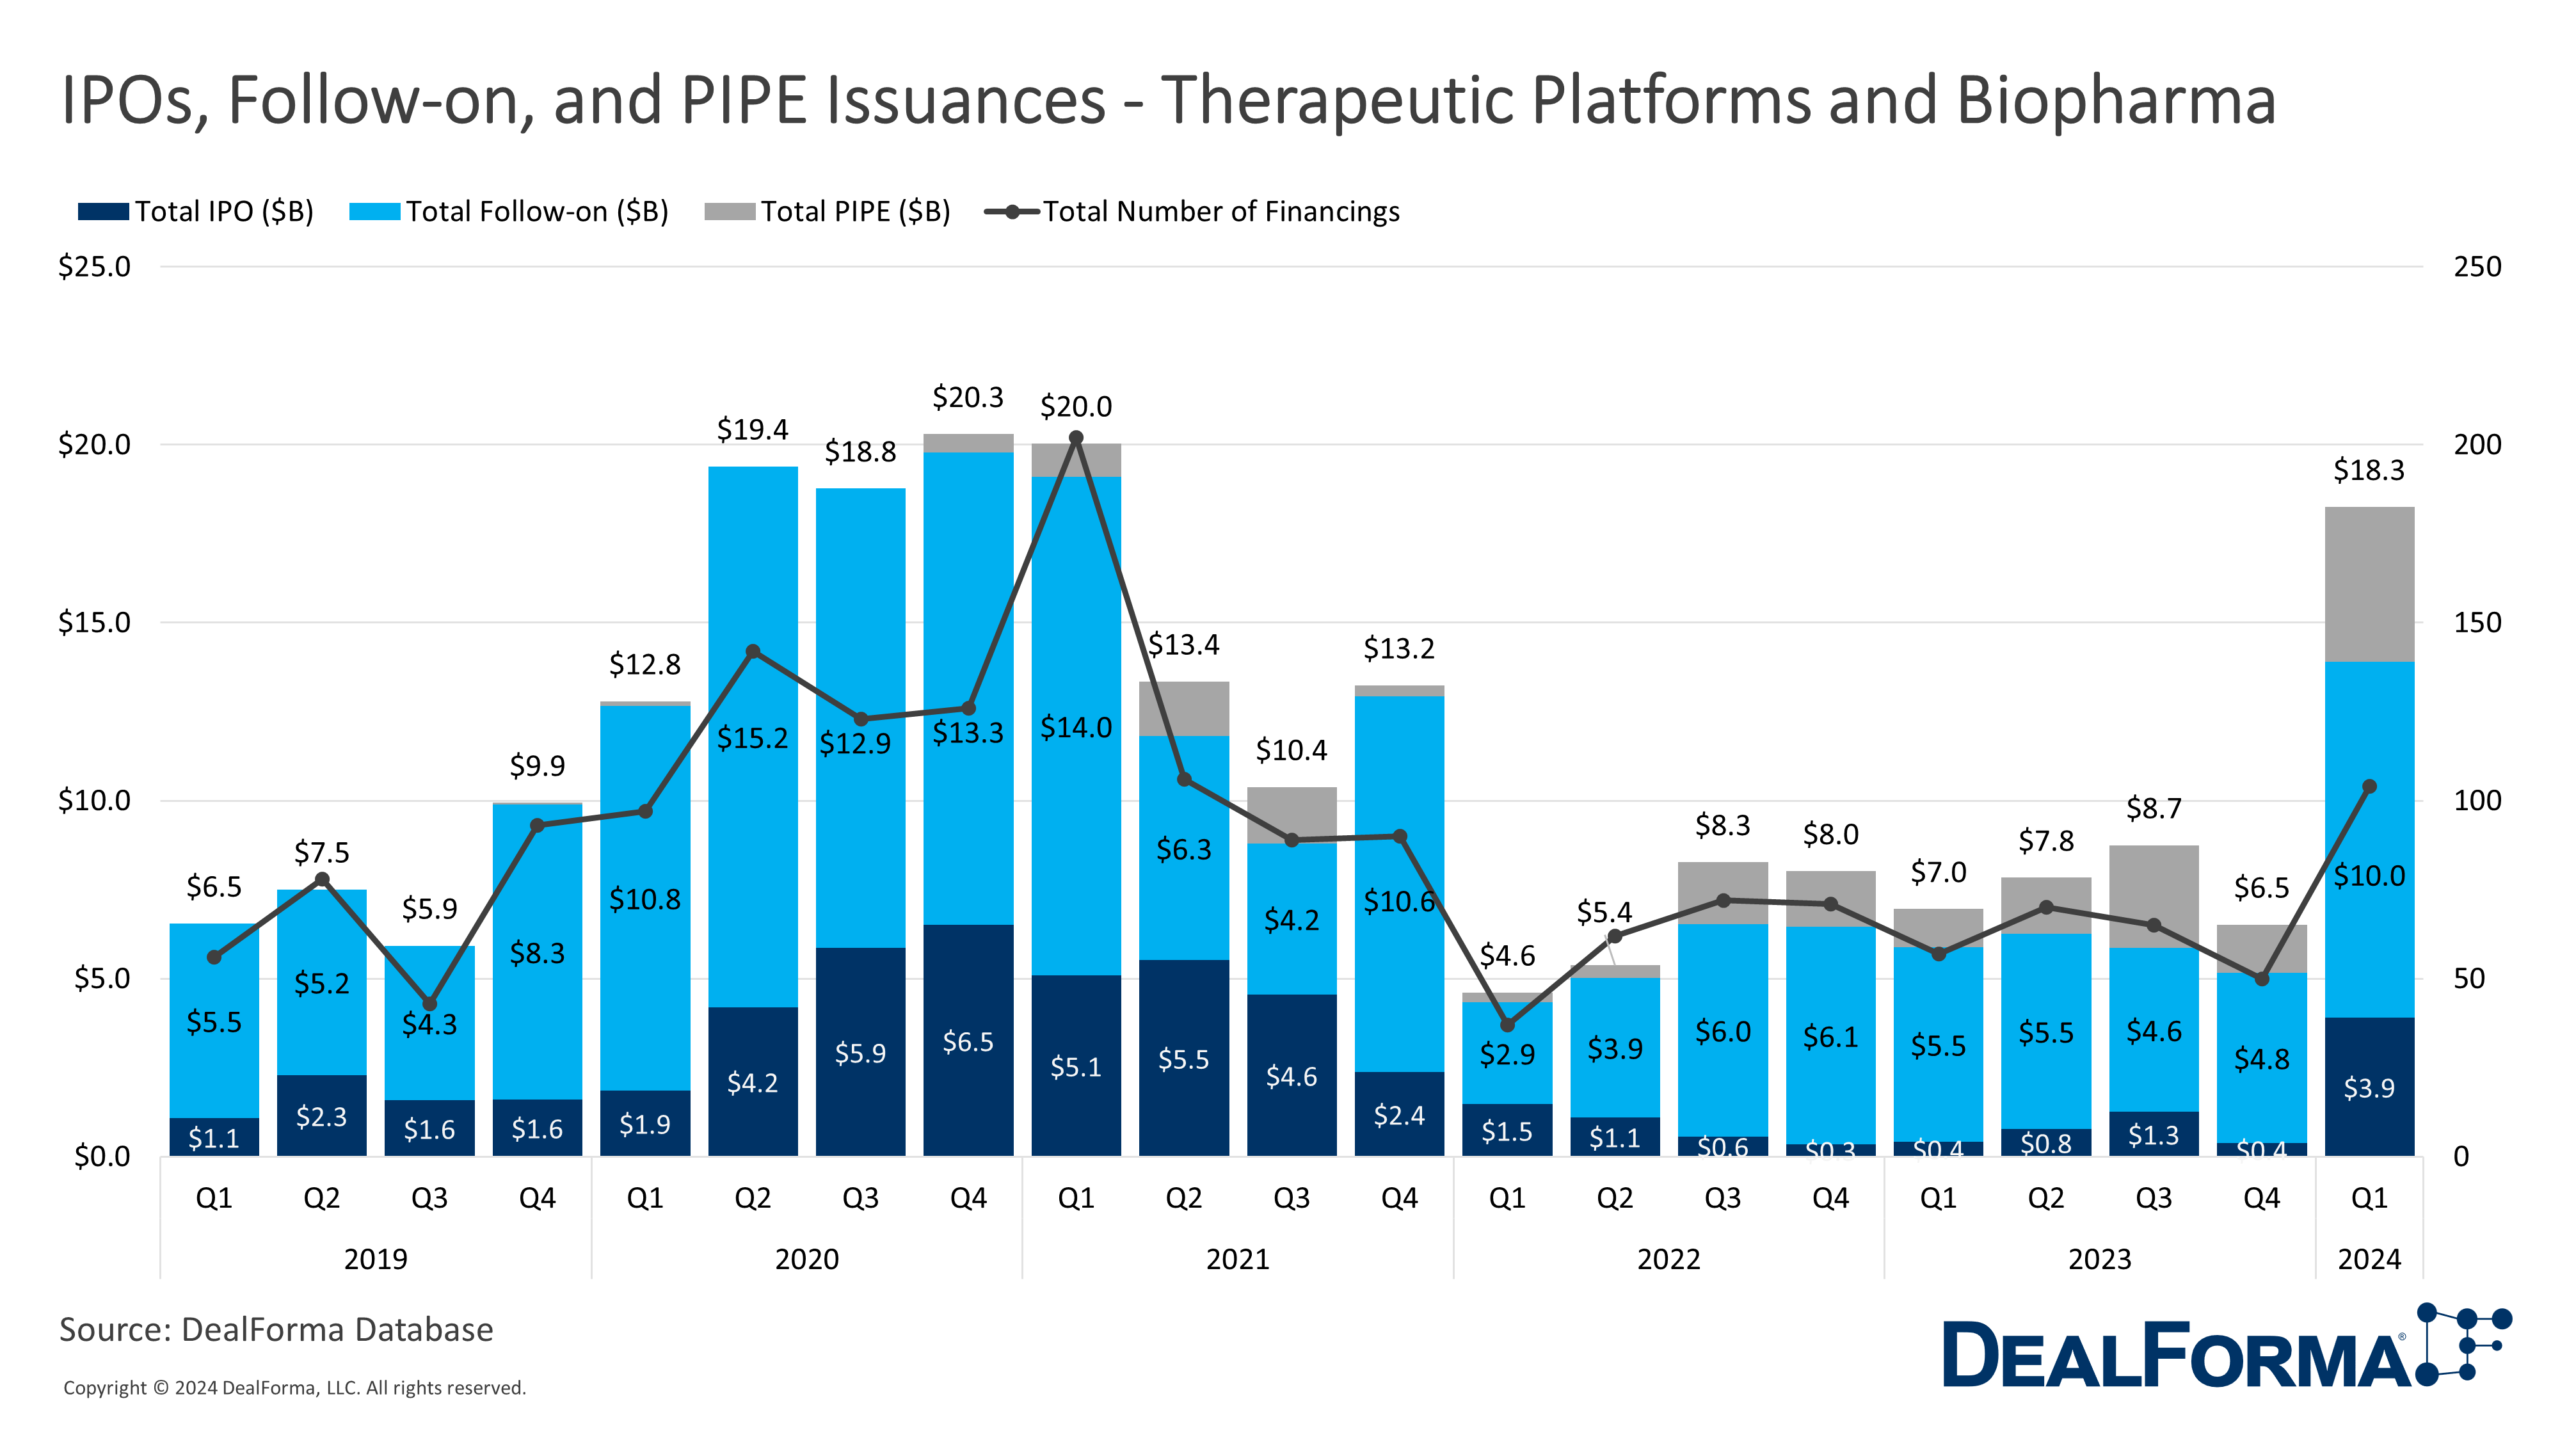 IPOs, Follow-on, and PIPE Issuances - Therapeutic Platforms and Biopharma